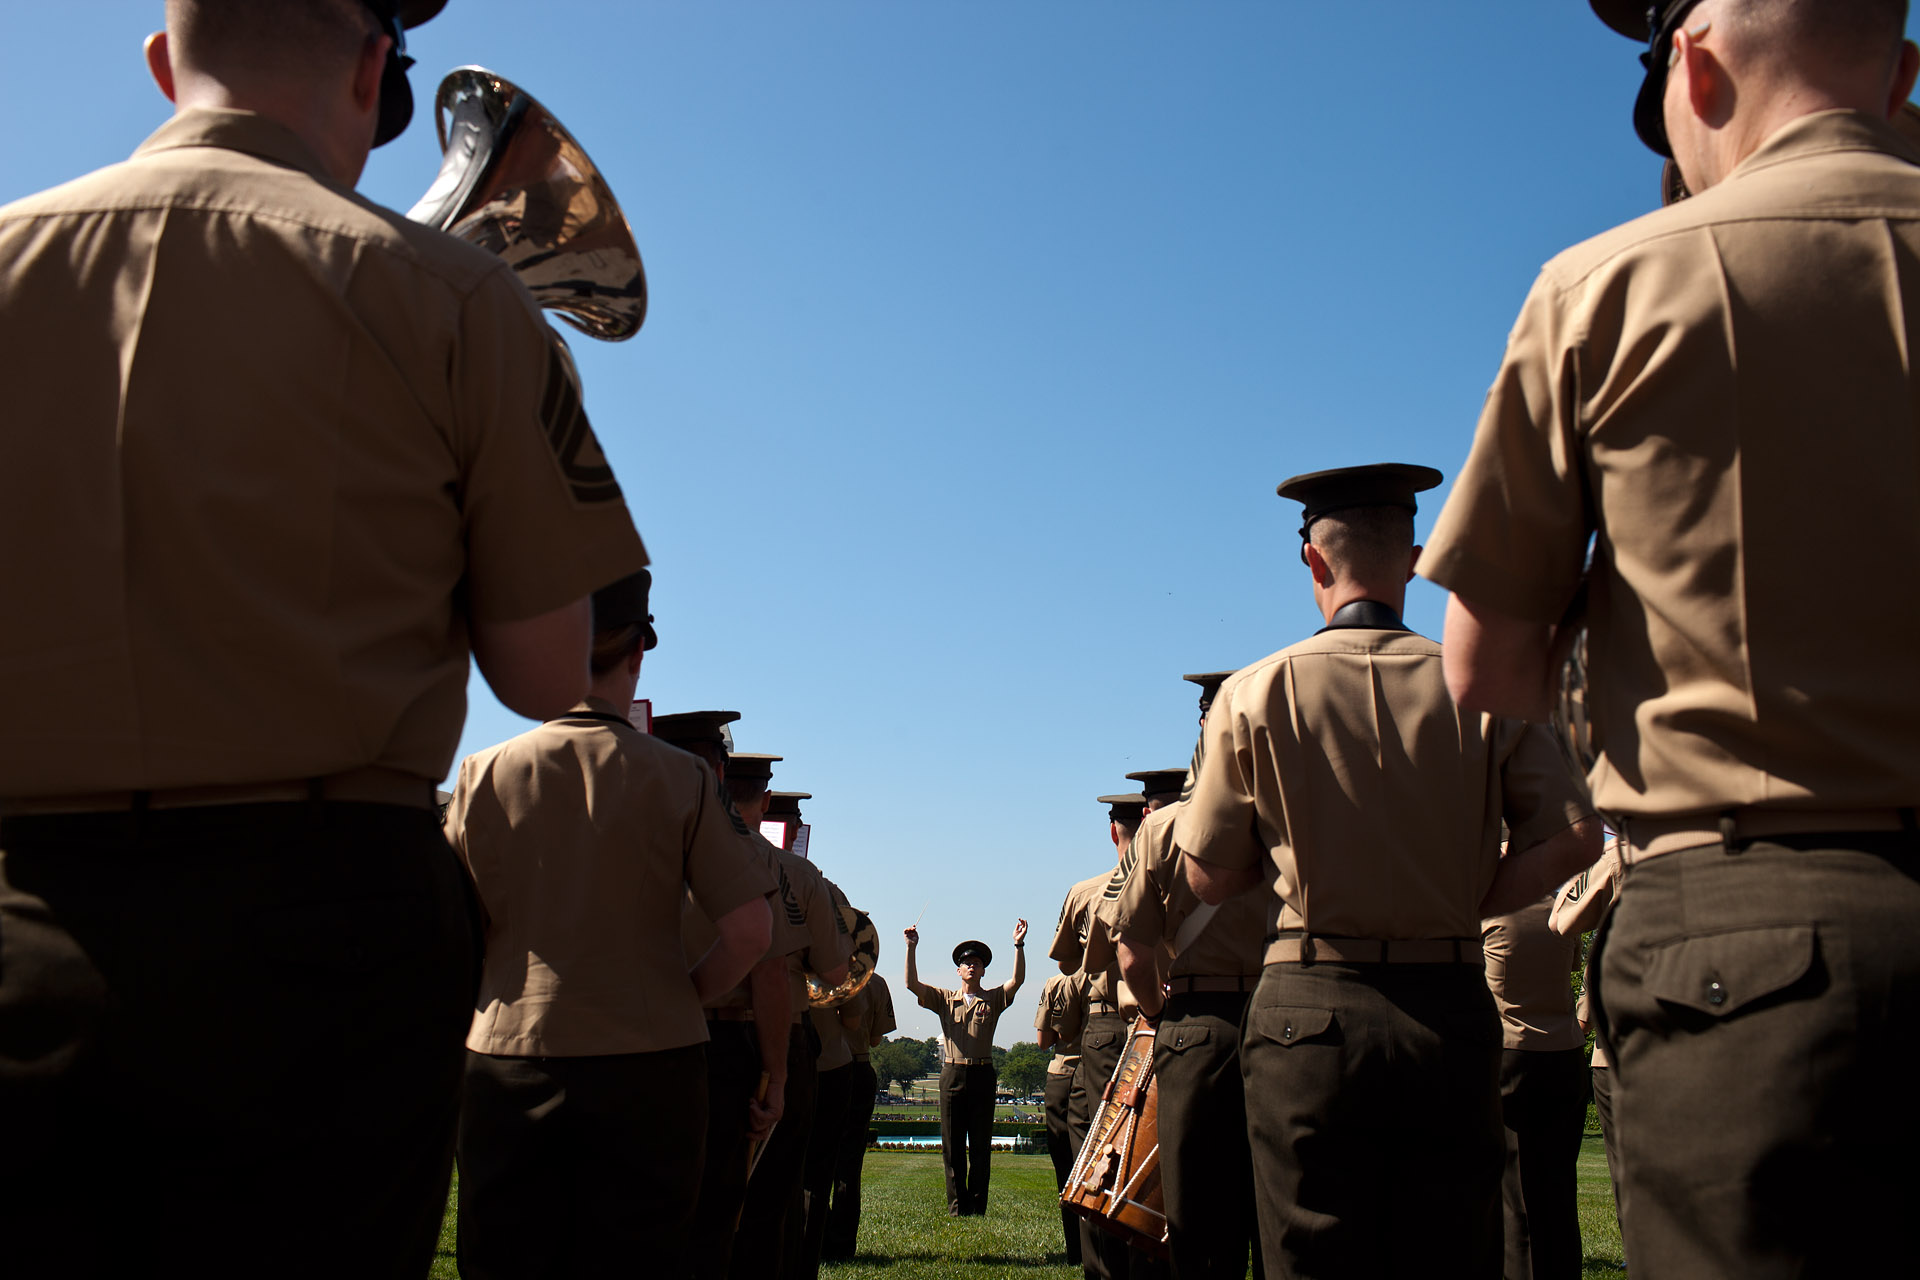 President’s Own Marine Band Practice for the Fourth of July